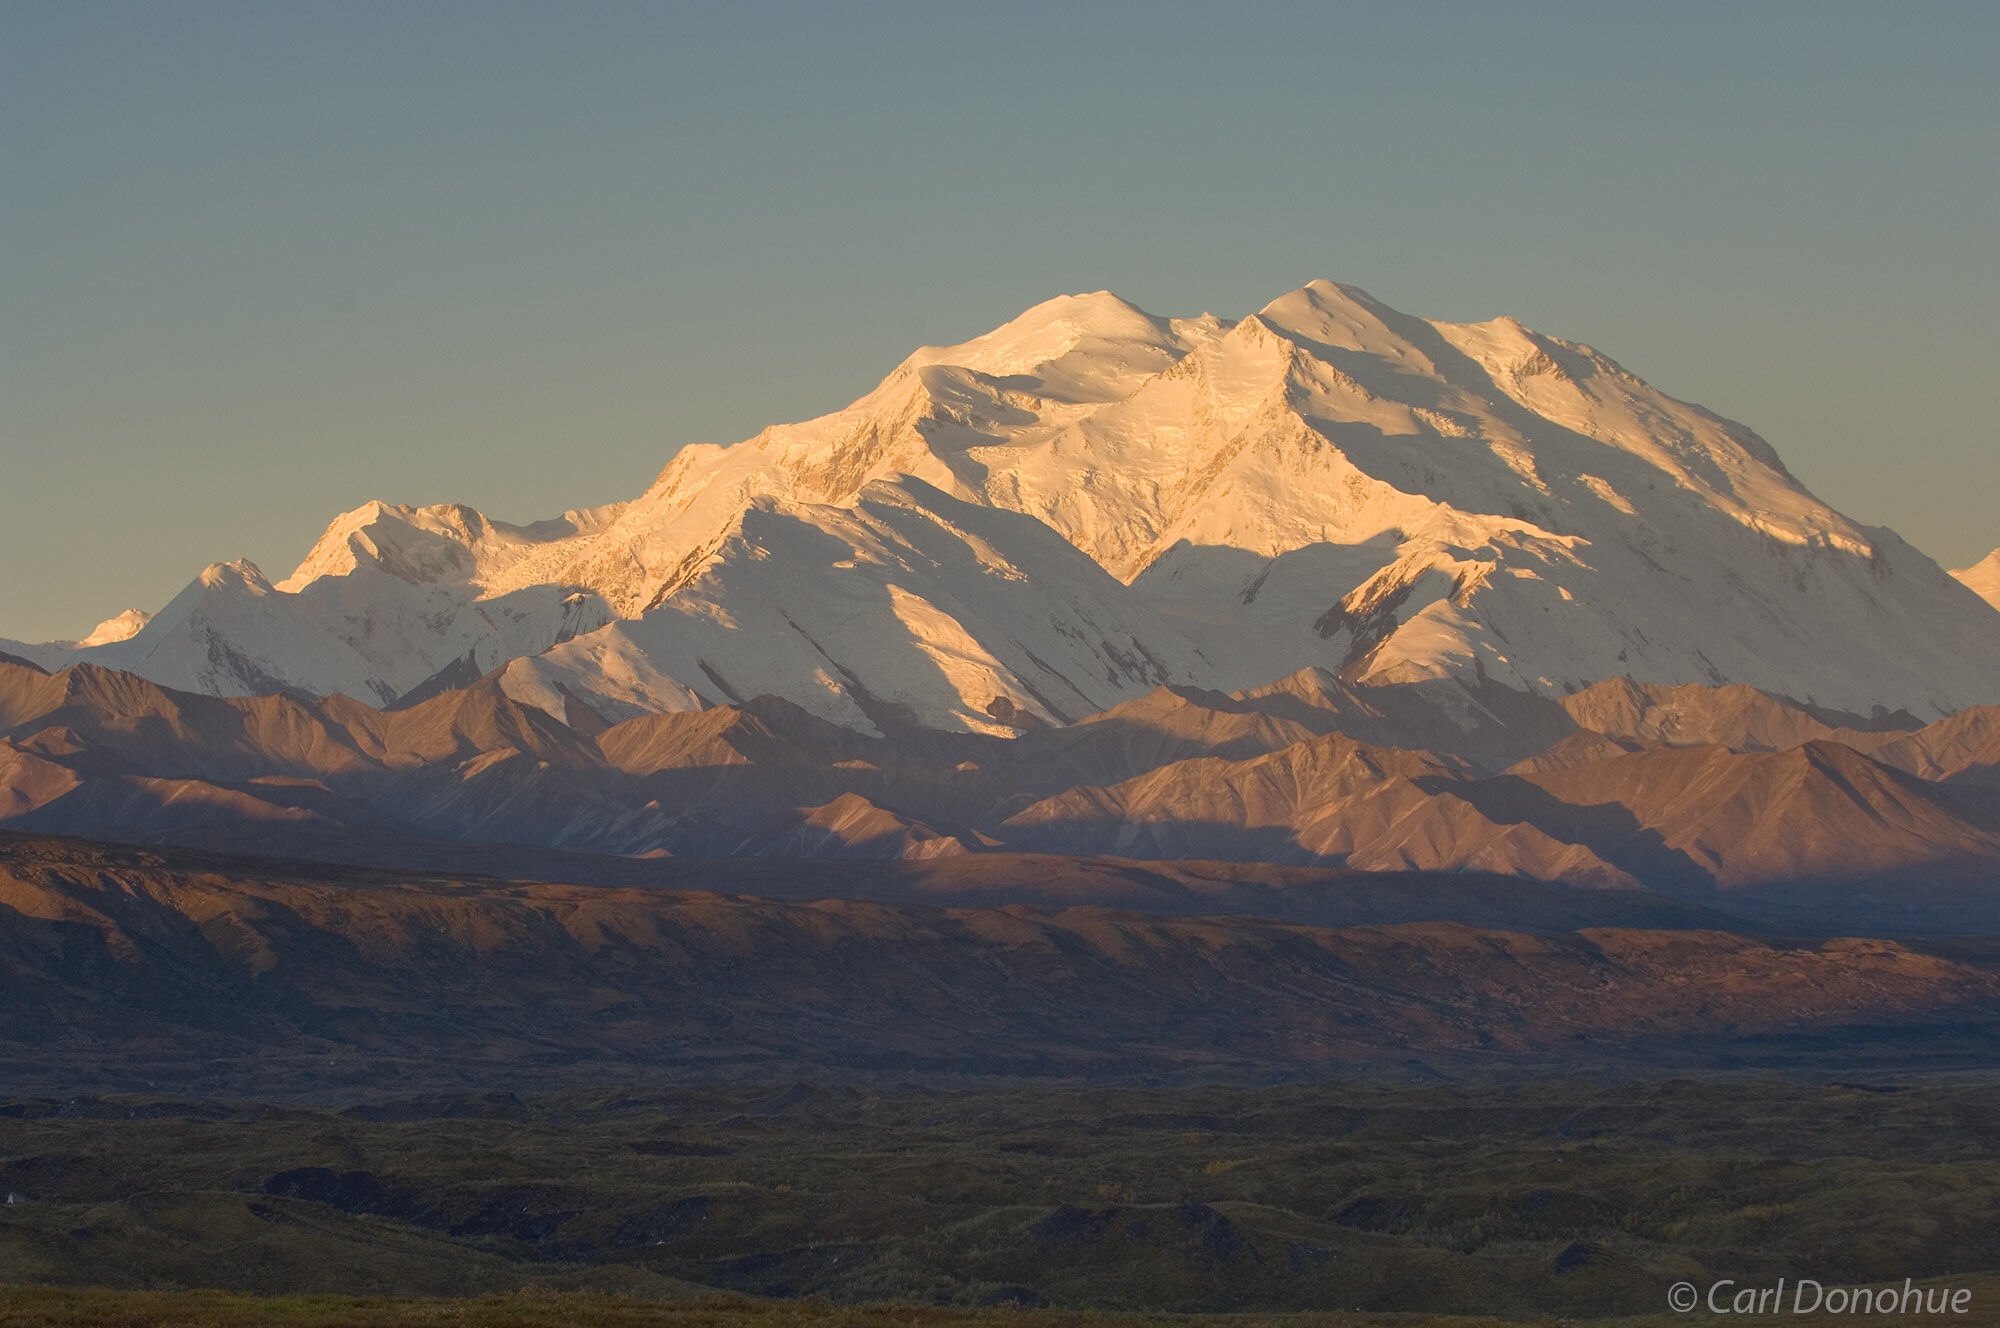 The peak, or summit of "Denali", or Mt. McKinley,  is over 20 000 feet above sea level, and this mountain is the highest mountain...